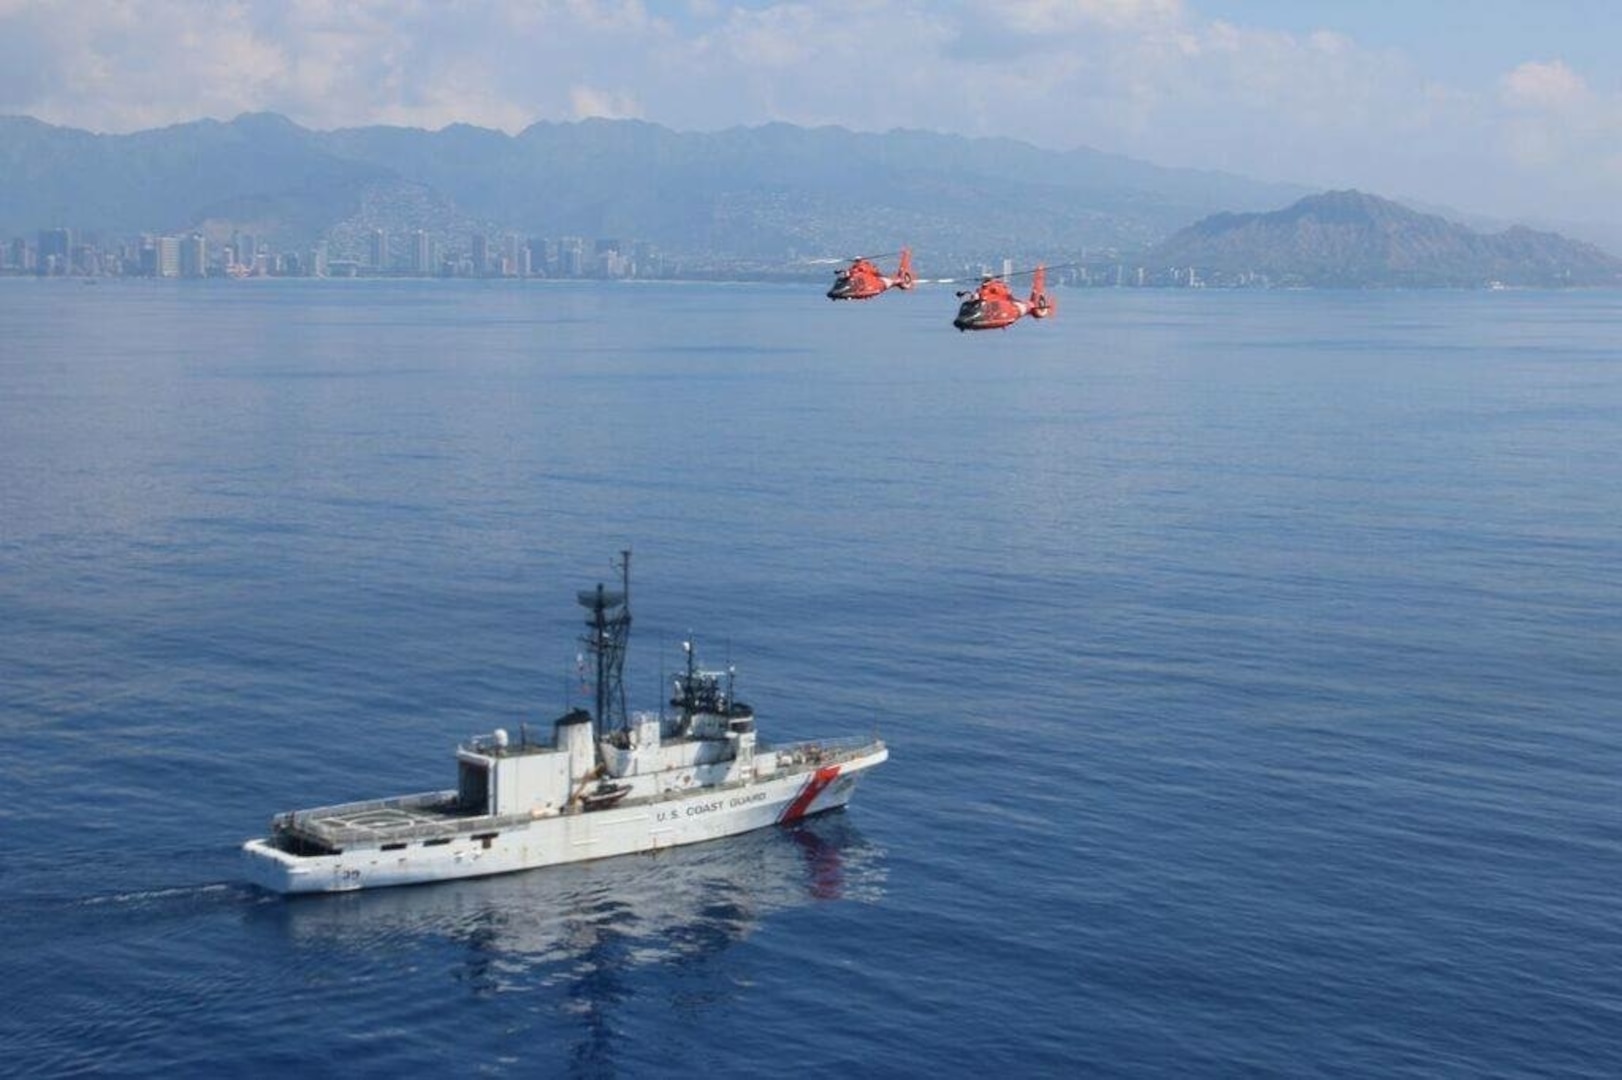 USCGC Alex Haley (WMEC 39) steams offshore of Honolulu as two MH-65 Dolphin helicopters from Coast Guard Air Station Barbers Point pass overhead March 4, 2016. The Alex Haley crew is in Hawaii for tailored ships training availability to assess the crew and the ship's readiness.